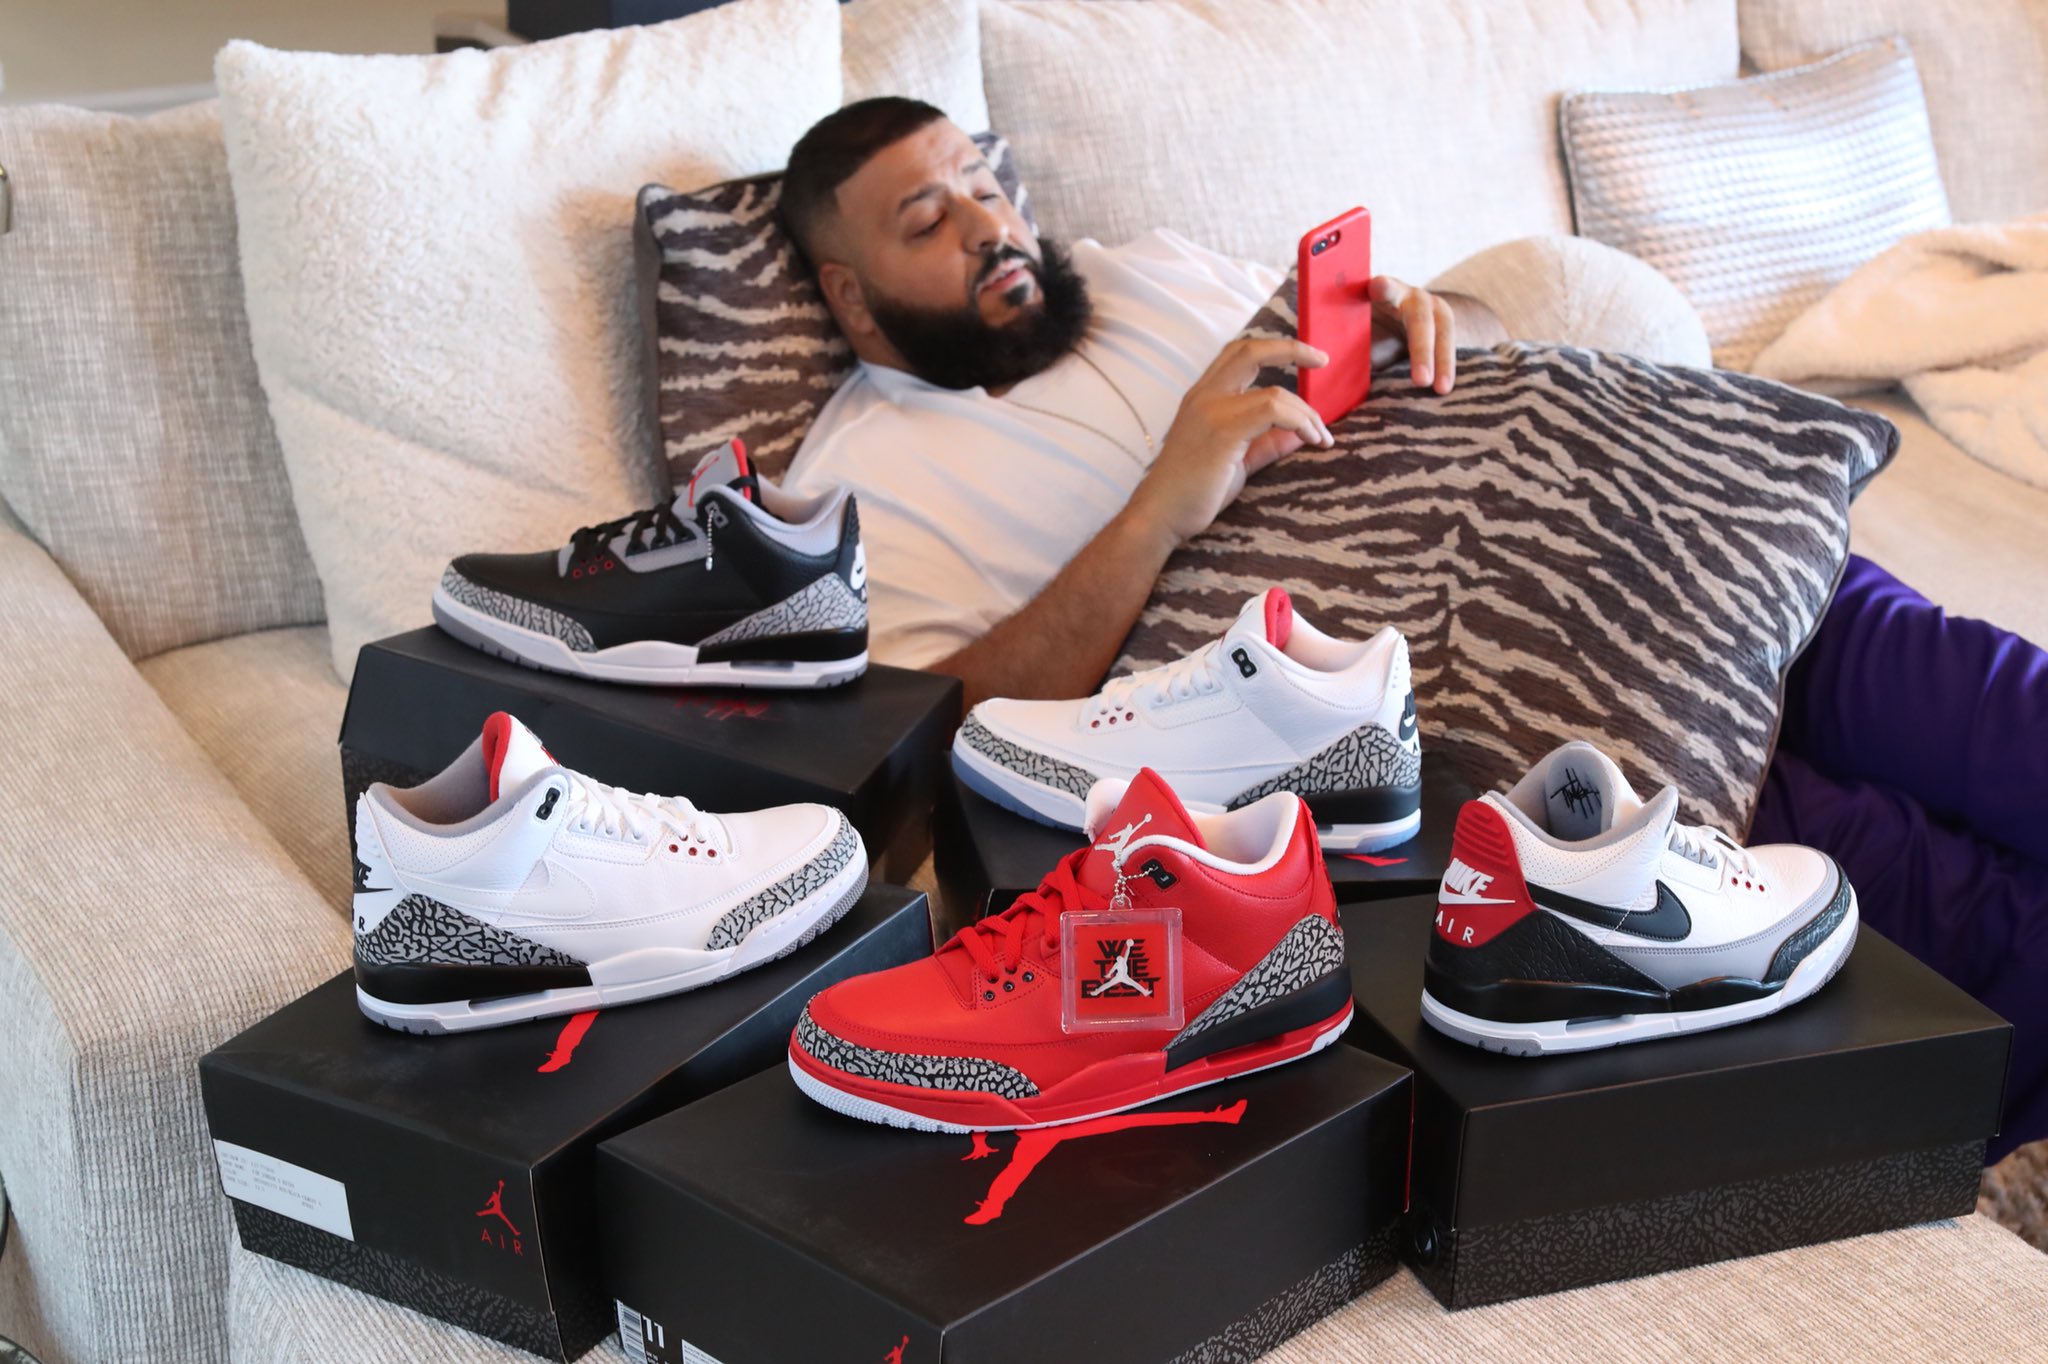 DJ Khaled Brought A Pillow For His New Super Exclusive Shoes To